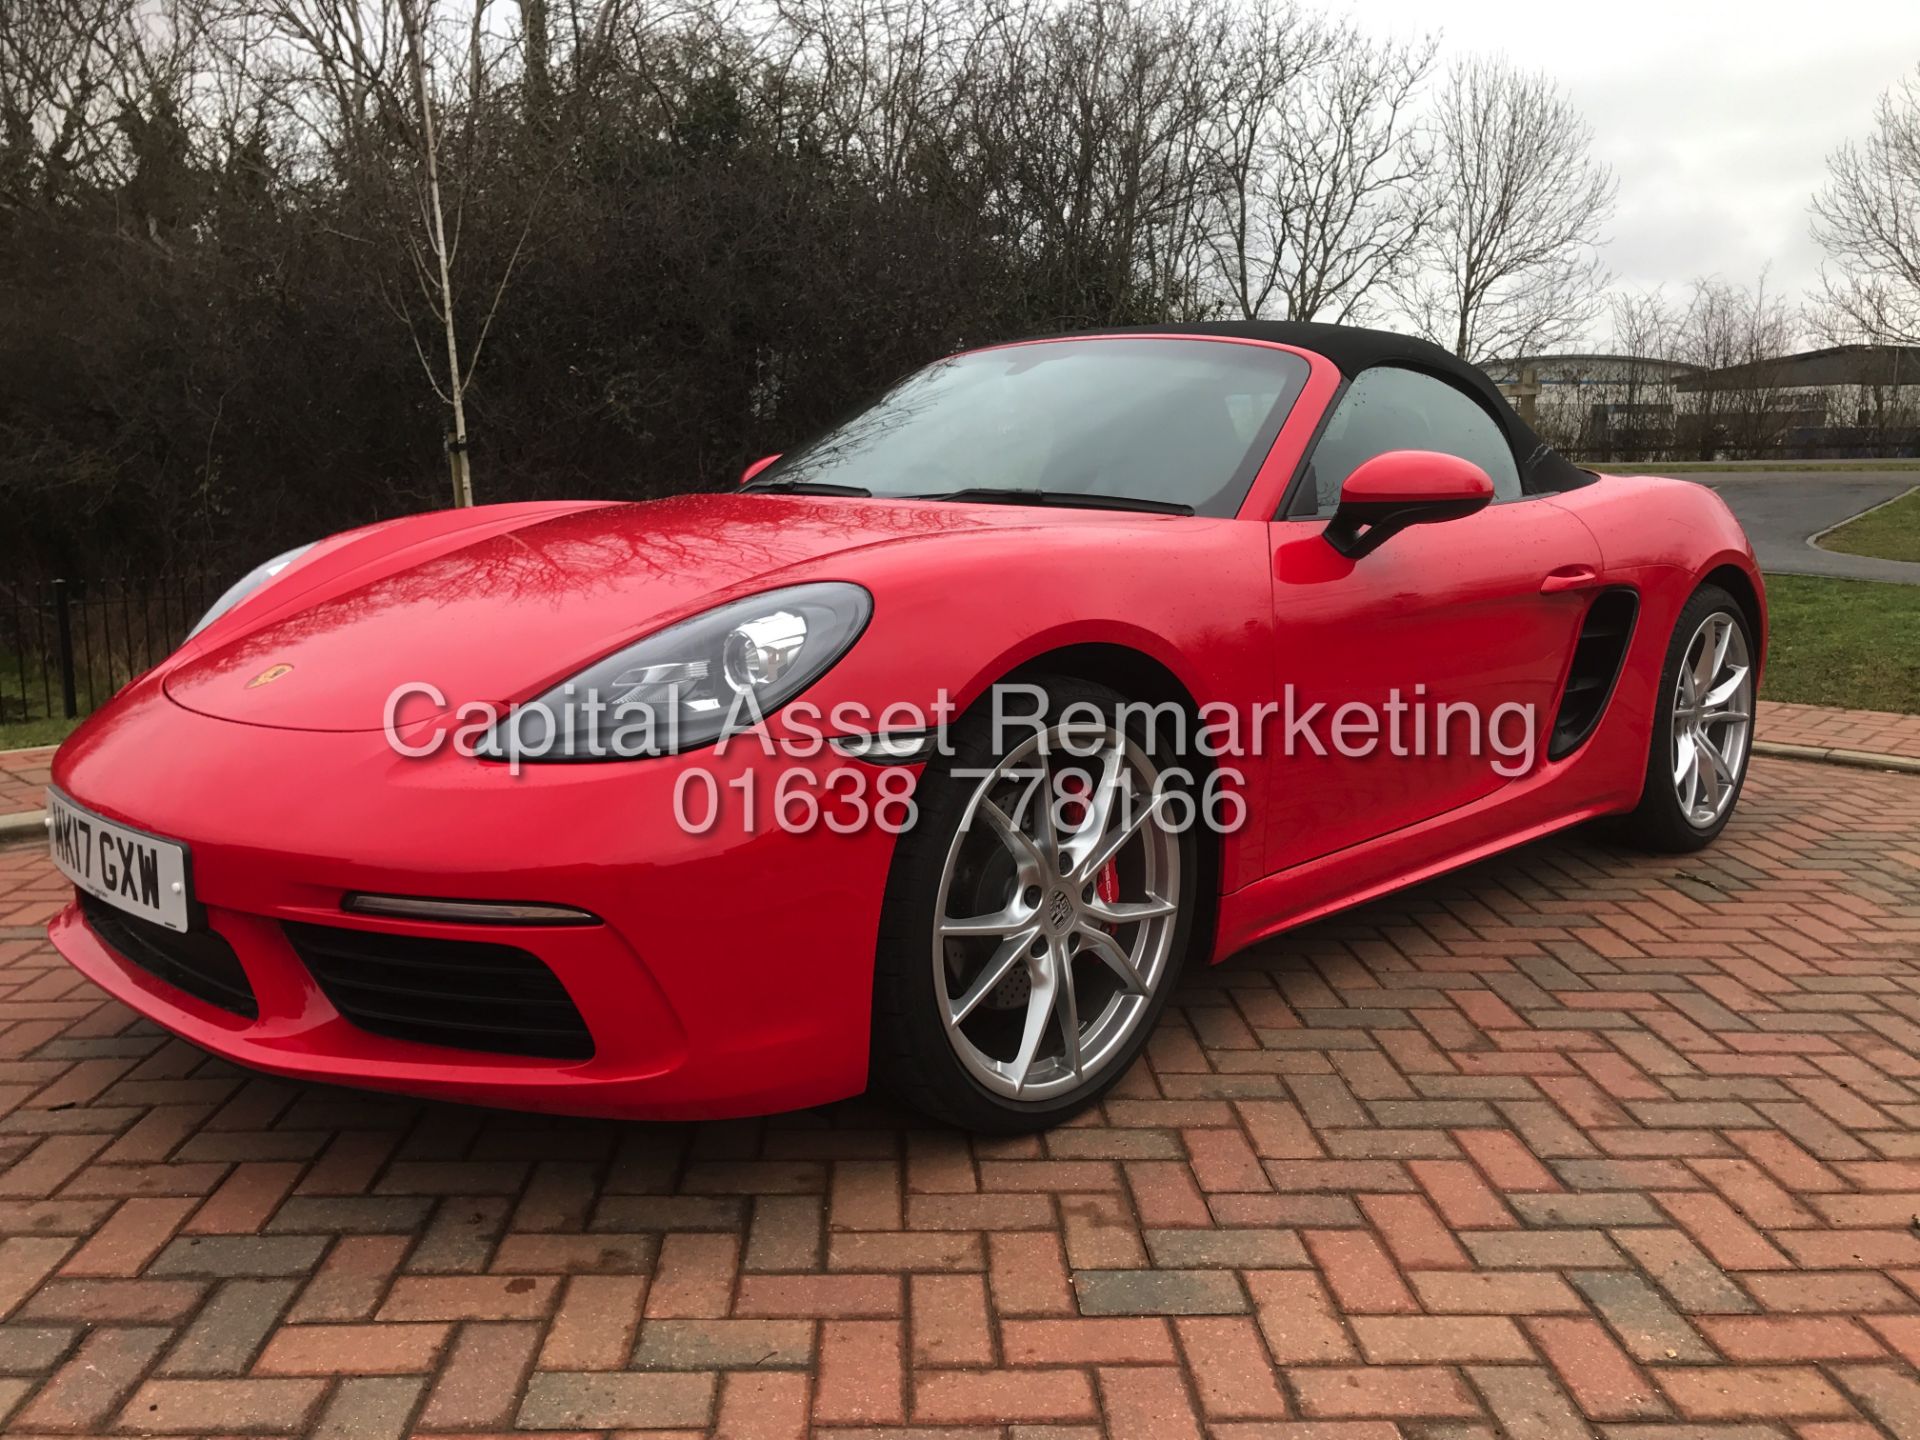 (ON SALE) PORSCHE BOXSTER S (718)CONVERTIBLE (17REG) NEW SHAPE-350 BHP-PDK AUTO' (1 OWNER-LOW MILES) - Image 8 of 34